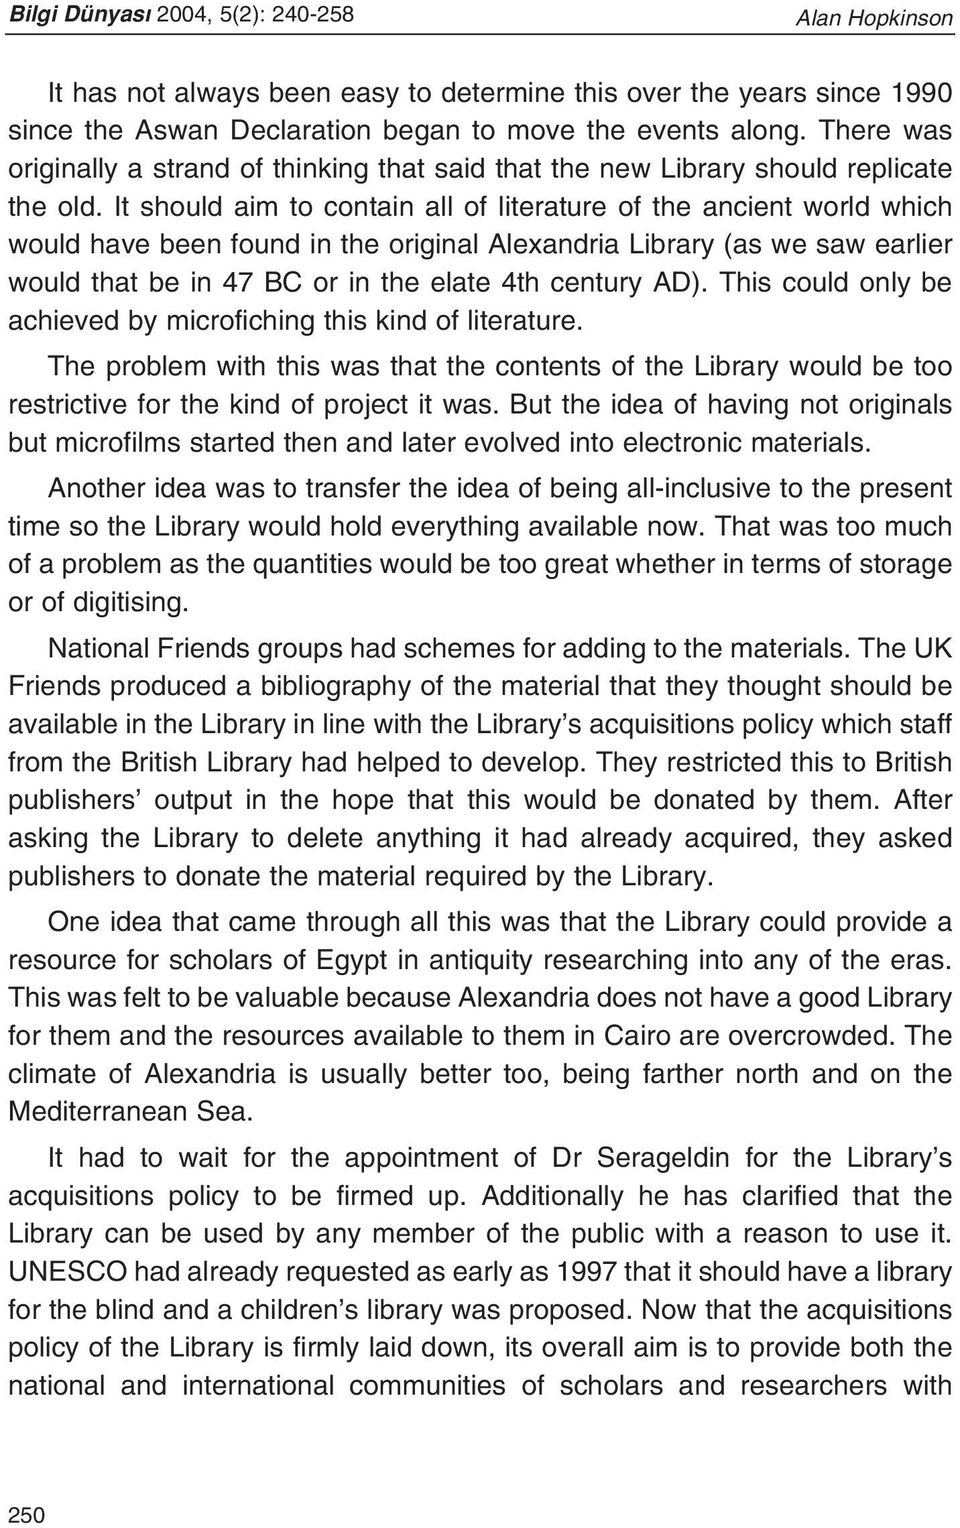 It should aim to contain all of literature of the ancient world which would have been found in the original Alexandria Library (as we saw earlier would that be in 47 BC or in the elate 4th century